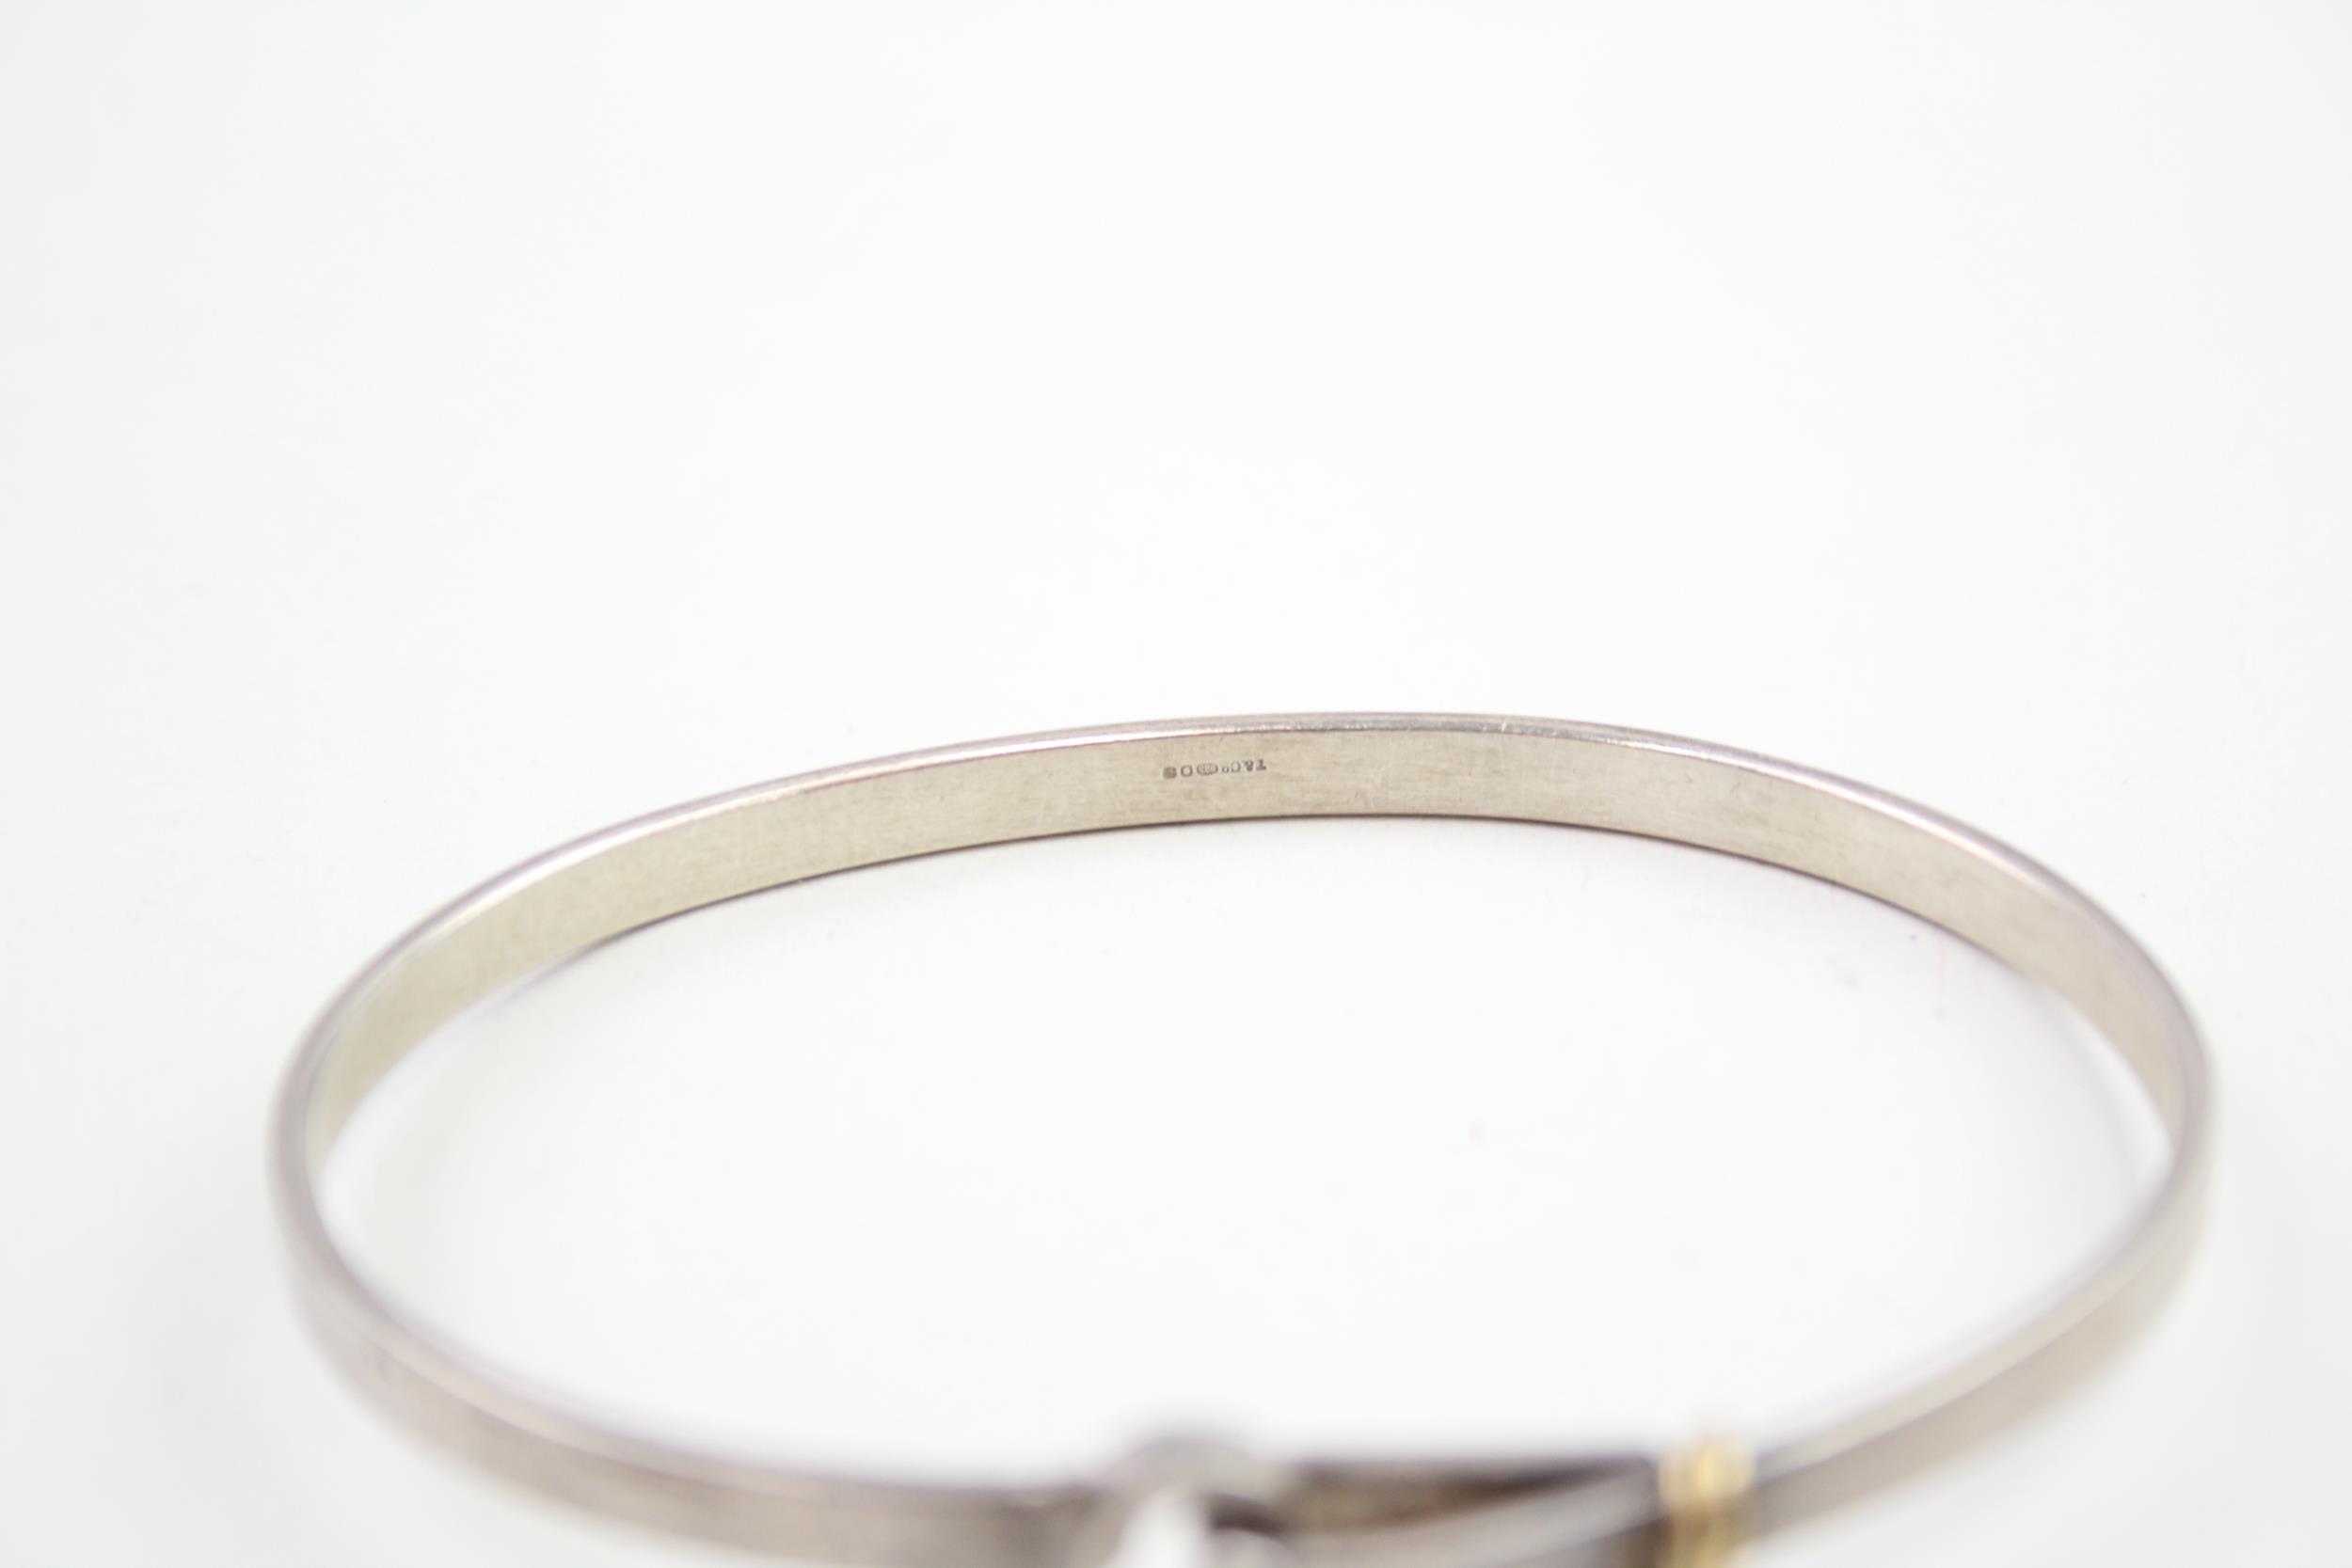 A silver bangle by Tiffany and Co with 18ct gold detailing (12g) - Image 2 of 4